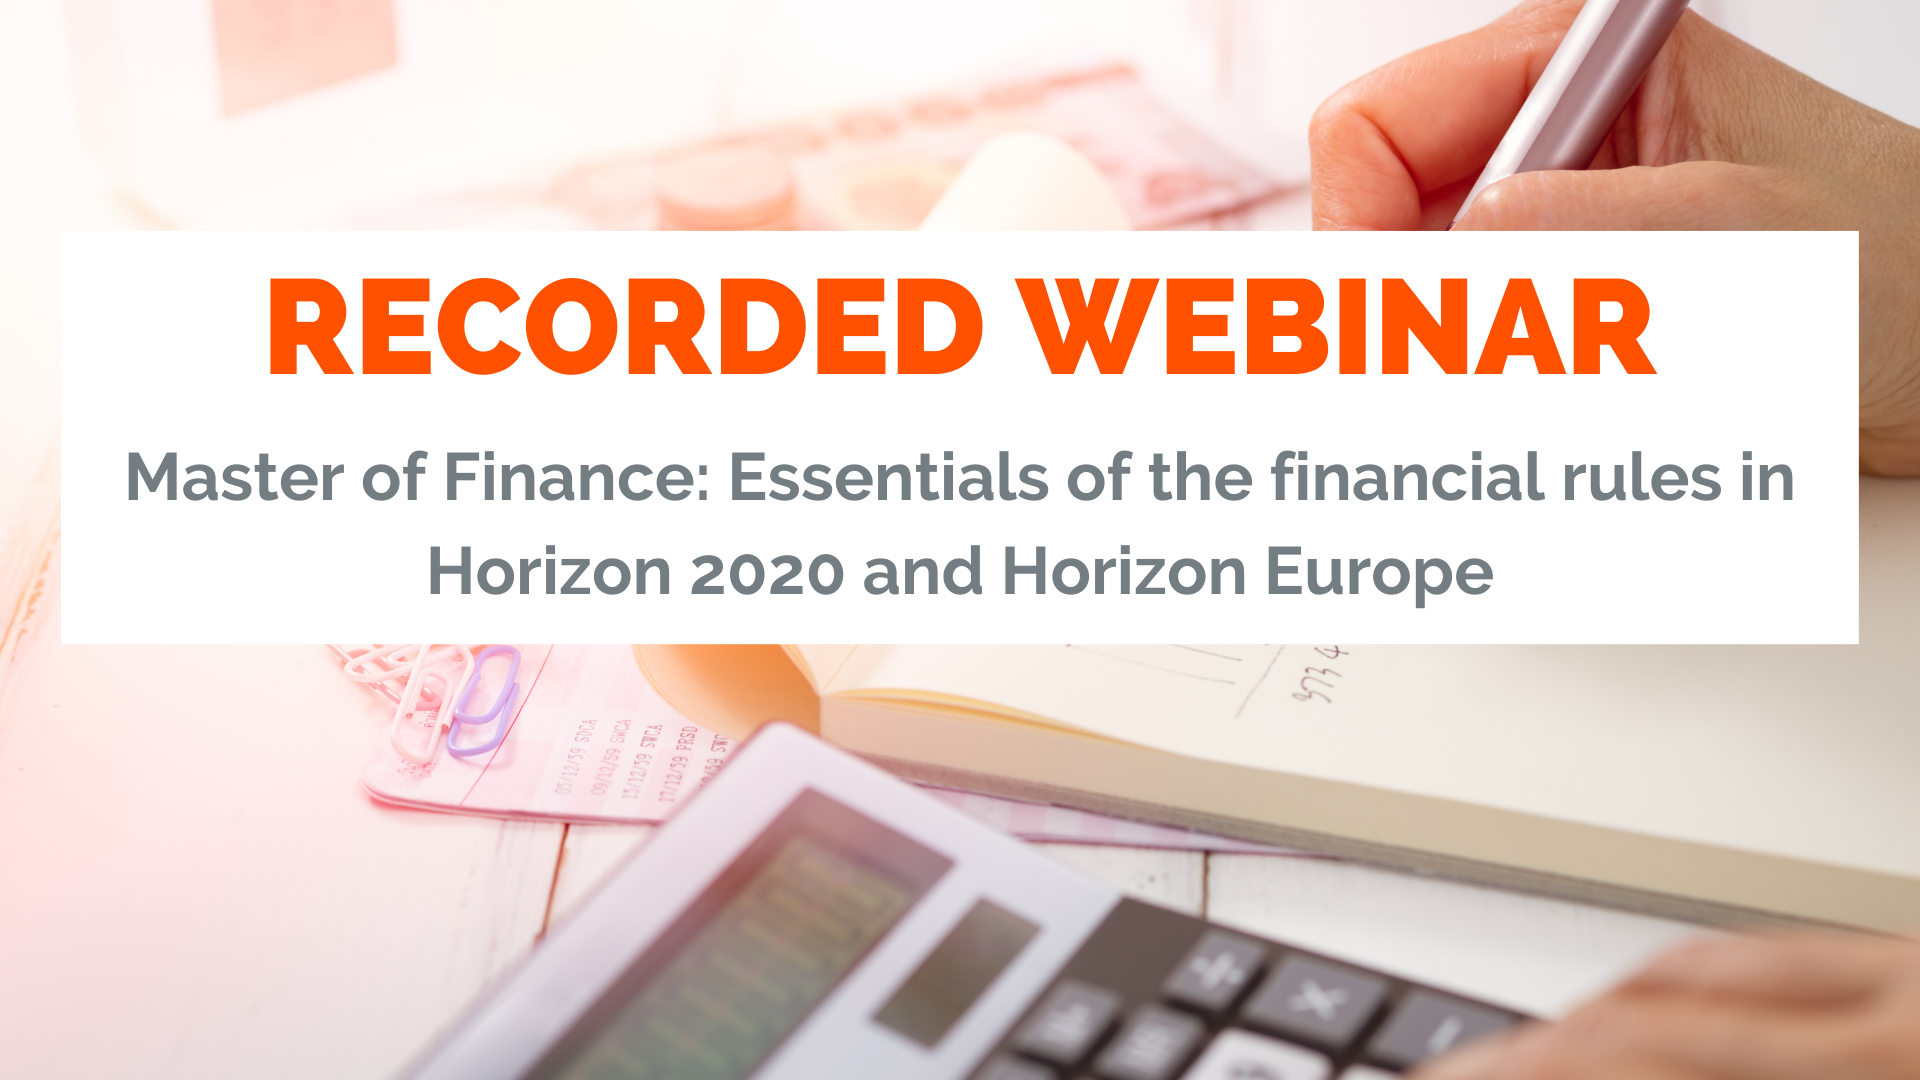 Master of Finance: Essentials of the financial rules in Horizon 2020 and Horizon Europe